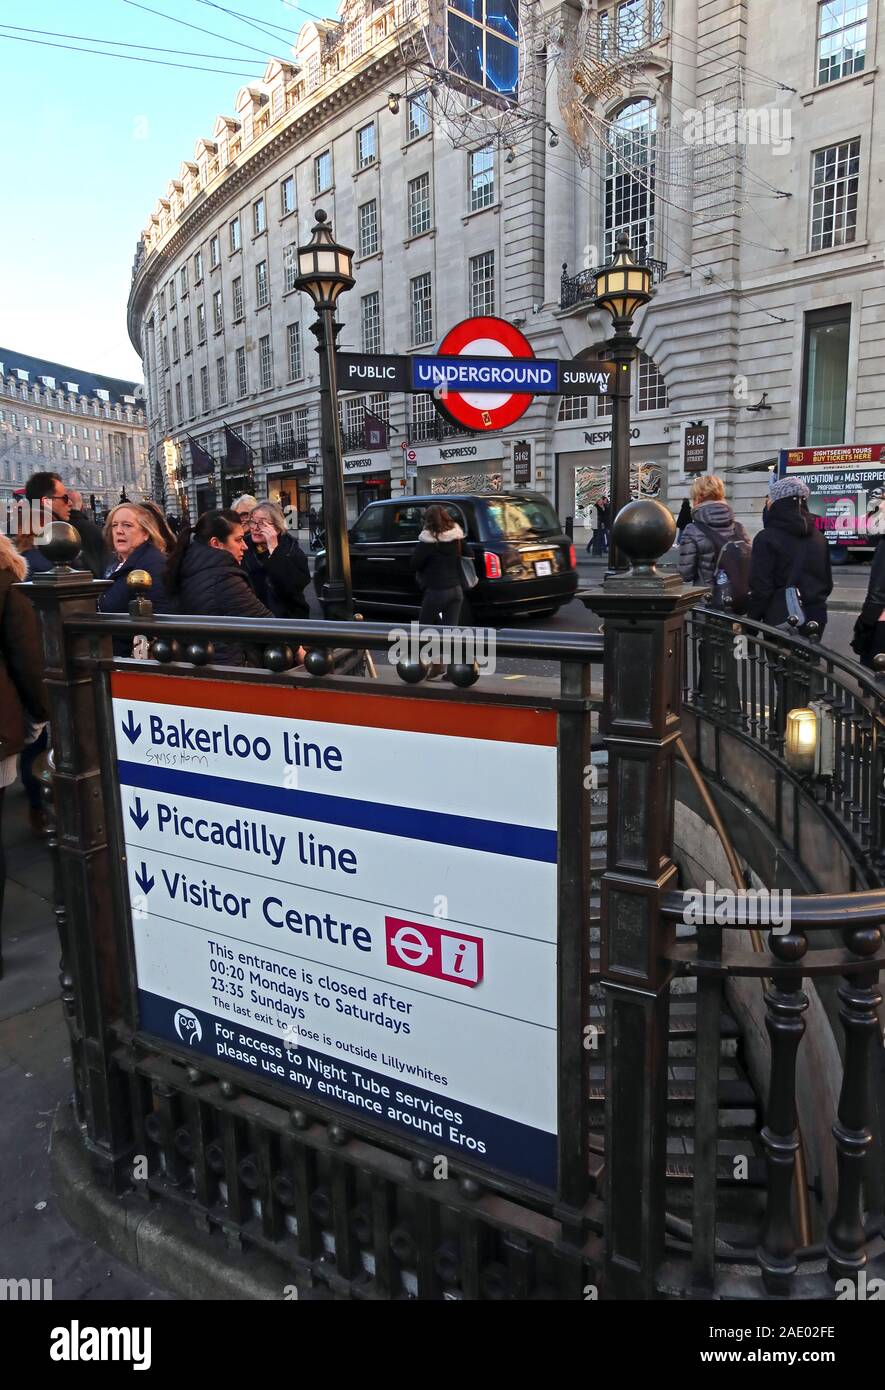 Outside Piccadilly Circus tube station,Bakerloo line,Piccadilly line,Visitor Centre,West end, London, England,UK Stock Photo